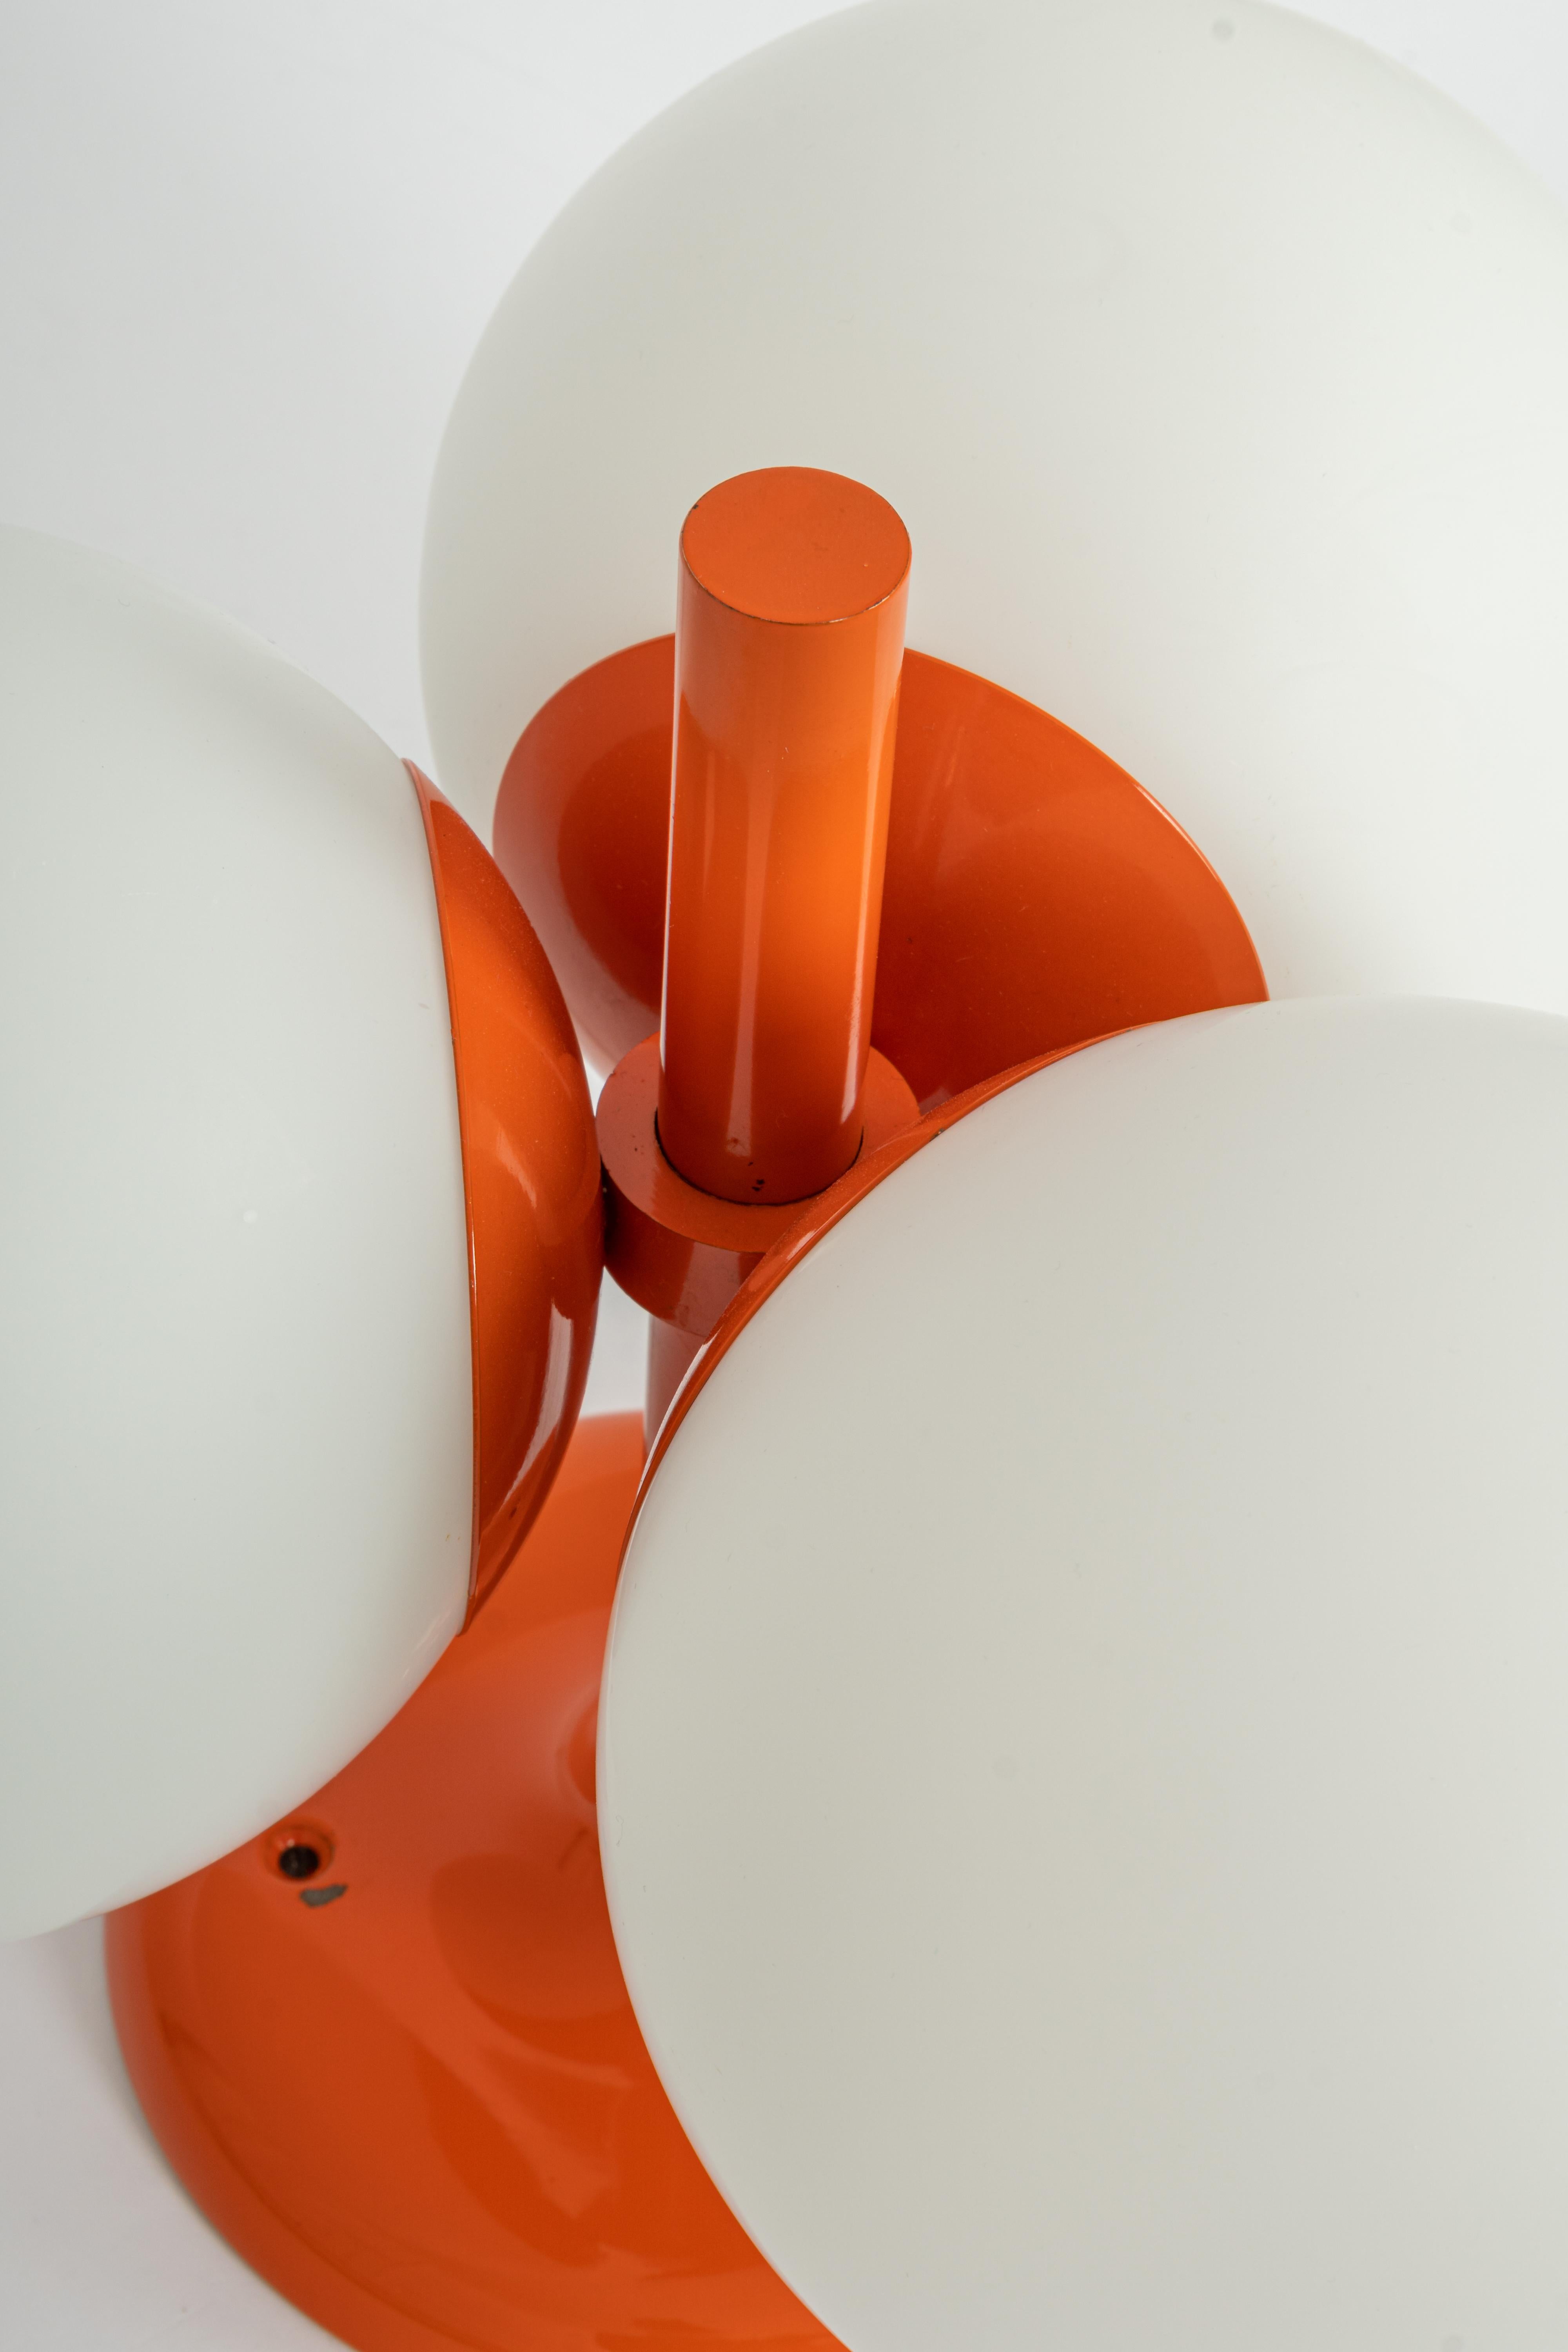 Late 20th Century 1 of 2 Midcentury Orbital Ceiling /Wall Lamp in Orange by Kaiser, Germany, 1970s